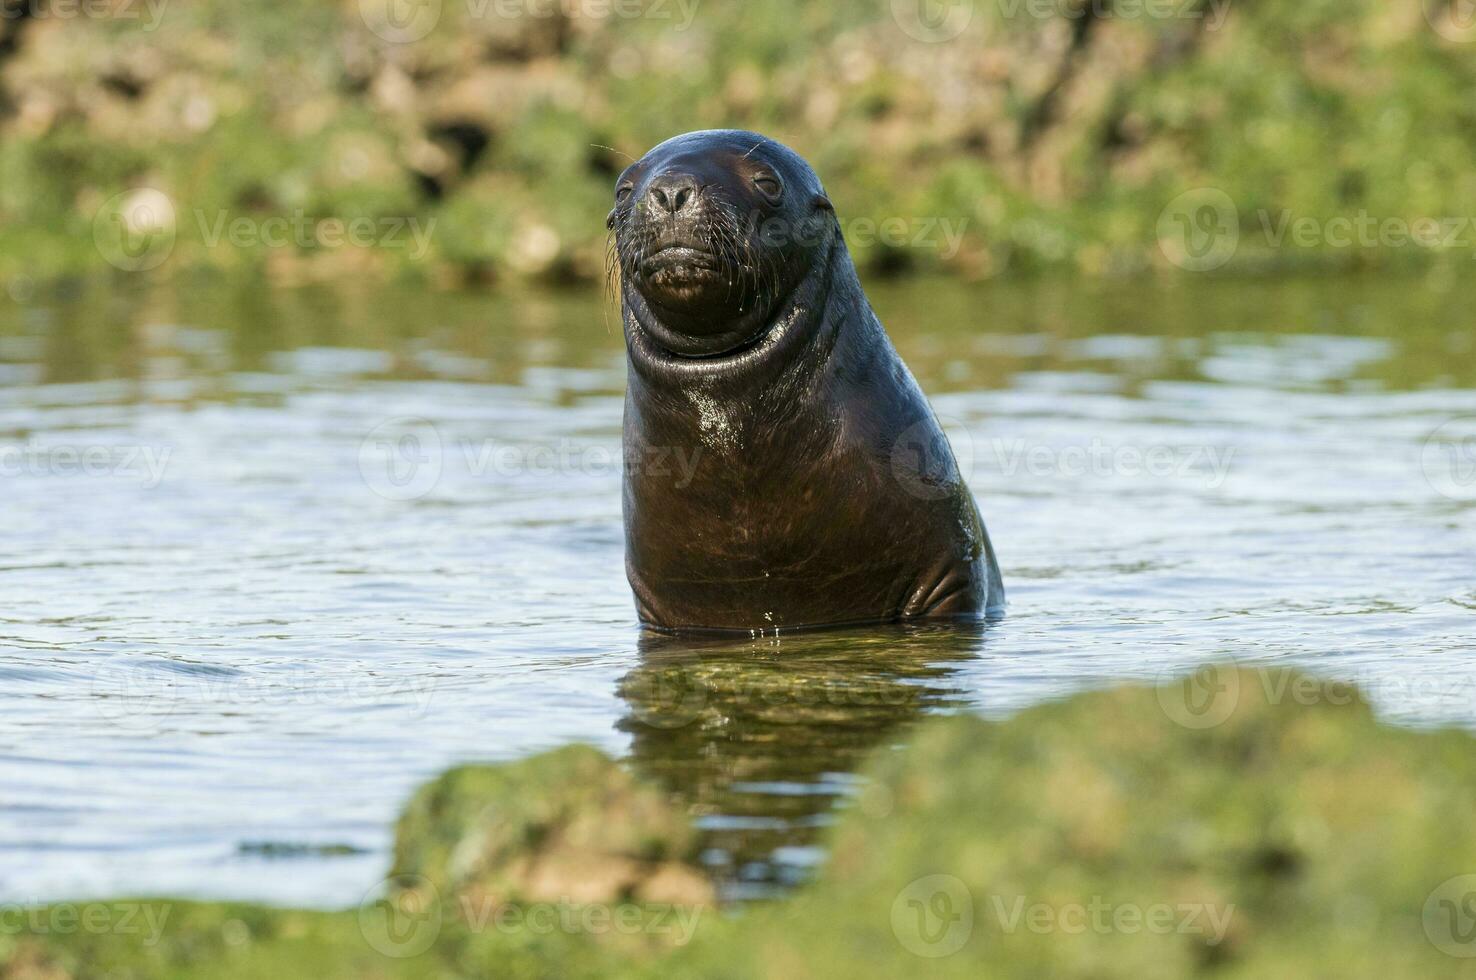 Seal in Patagonia photo